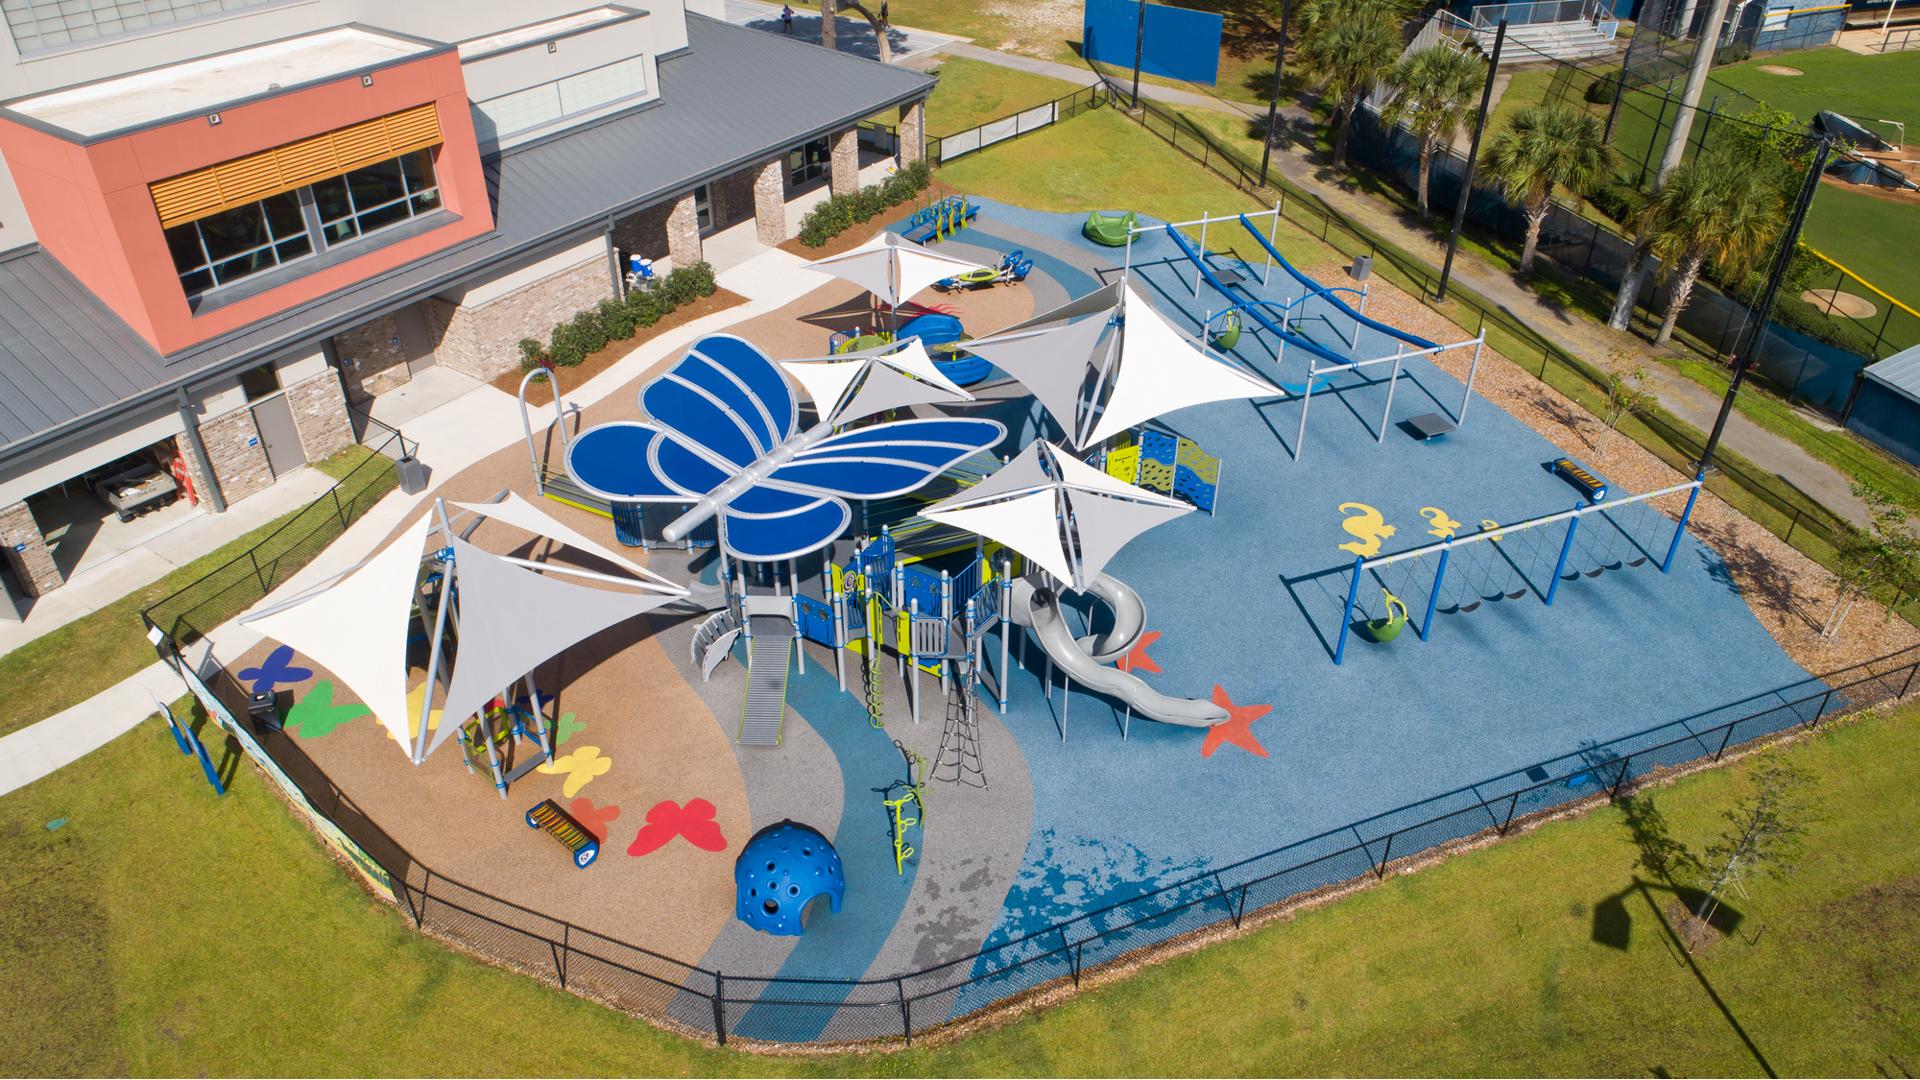 Aerial view of playground with a blue butterfly shaped shade structure. Playground surfacing includes colorful butterflies and starfish all next to school building. 